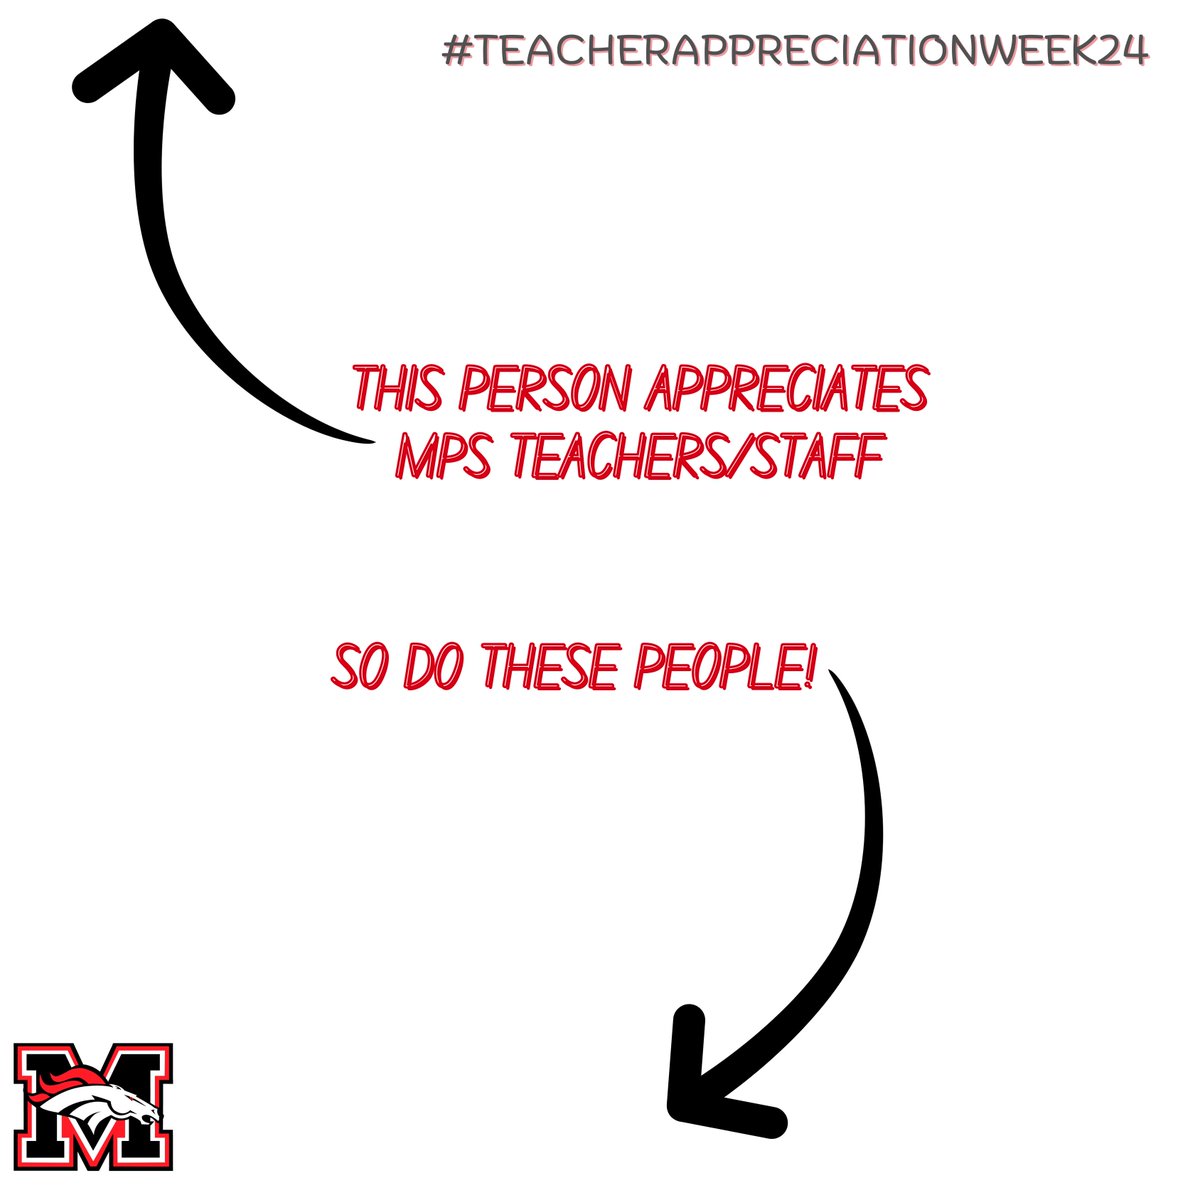 Feel free to use/share this graphic all week as we celebrate #TeacherAppreciationWeek24!